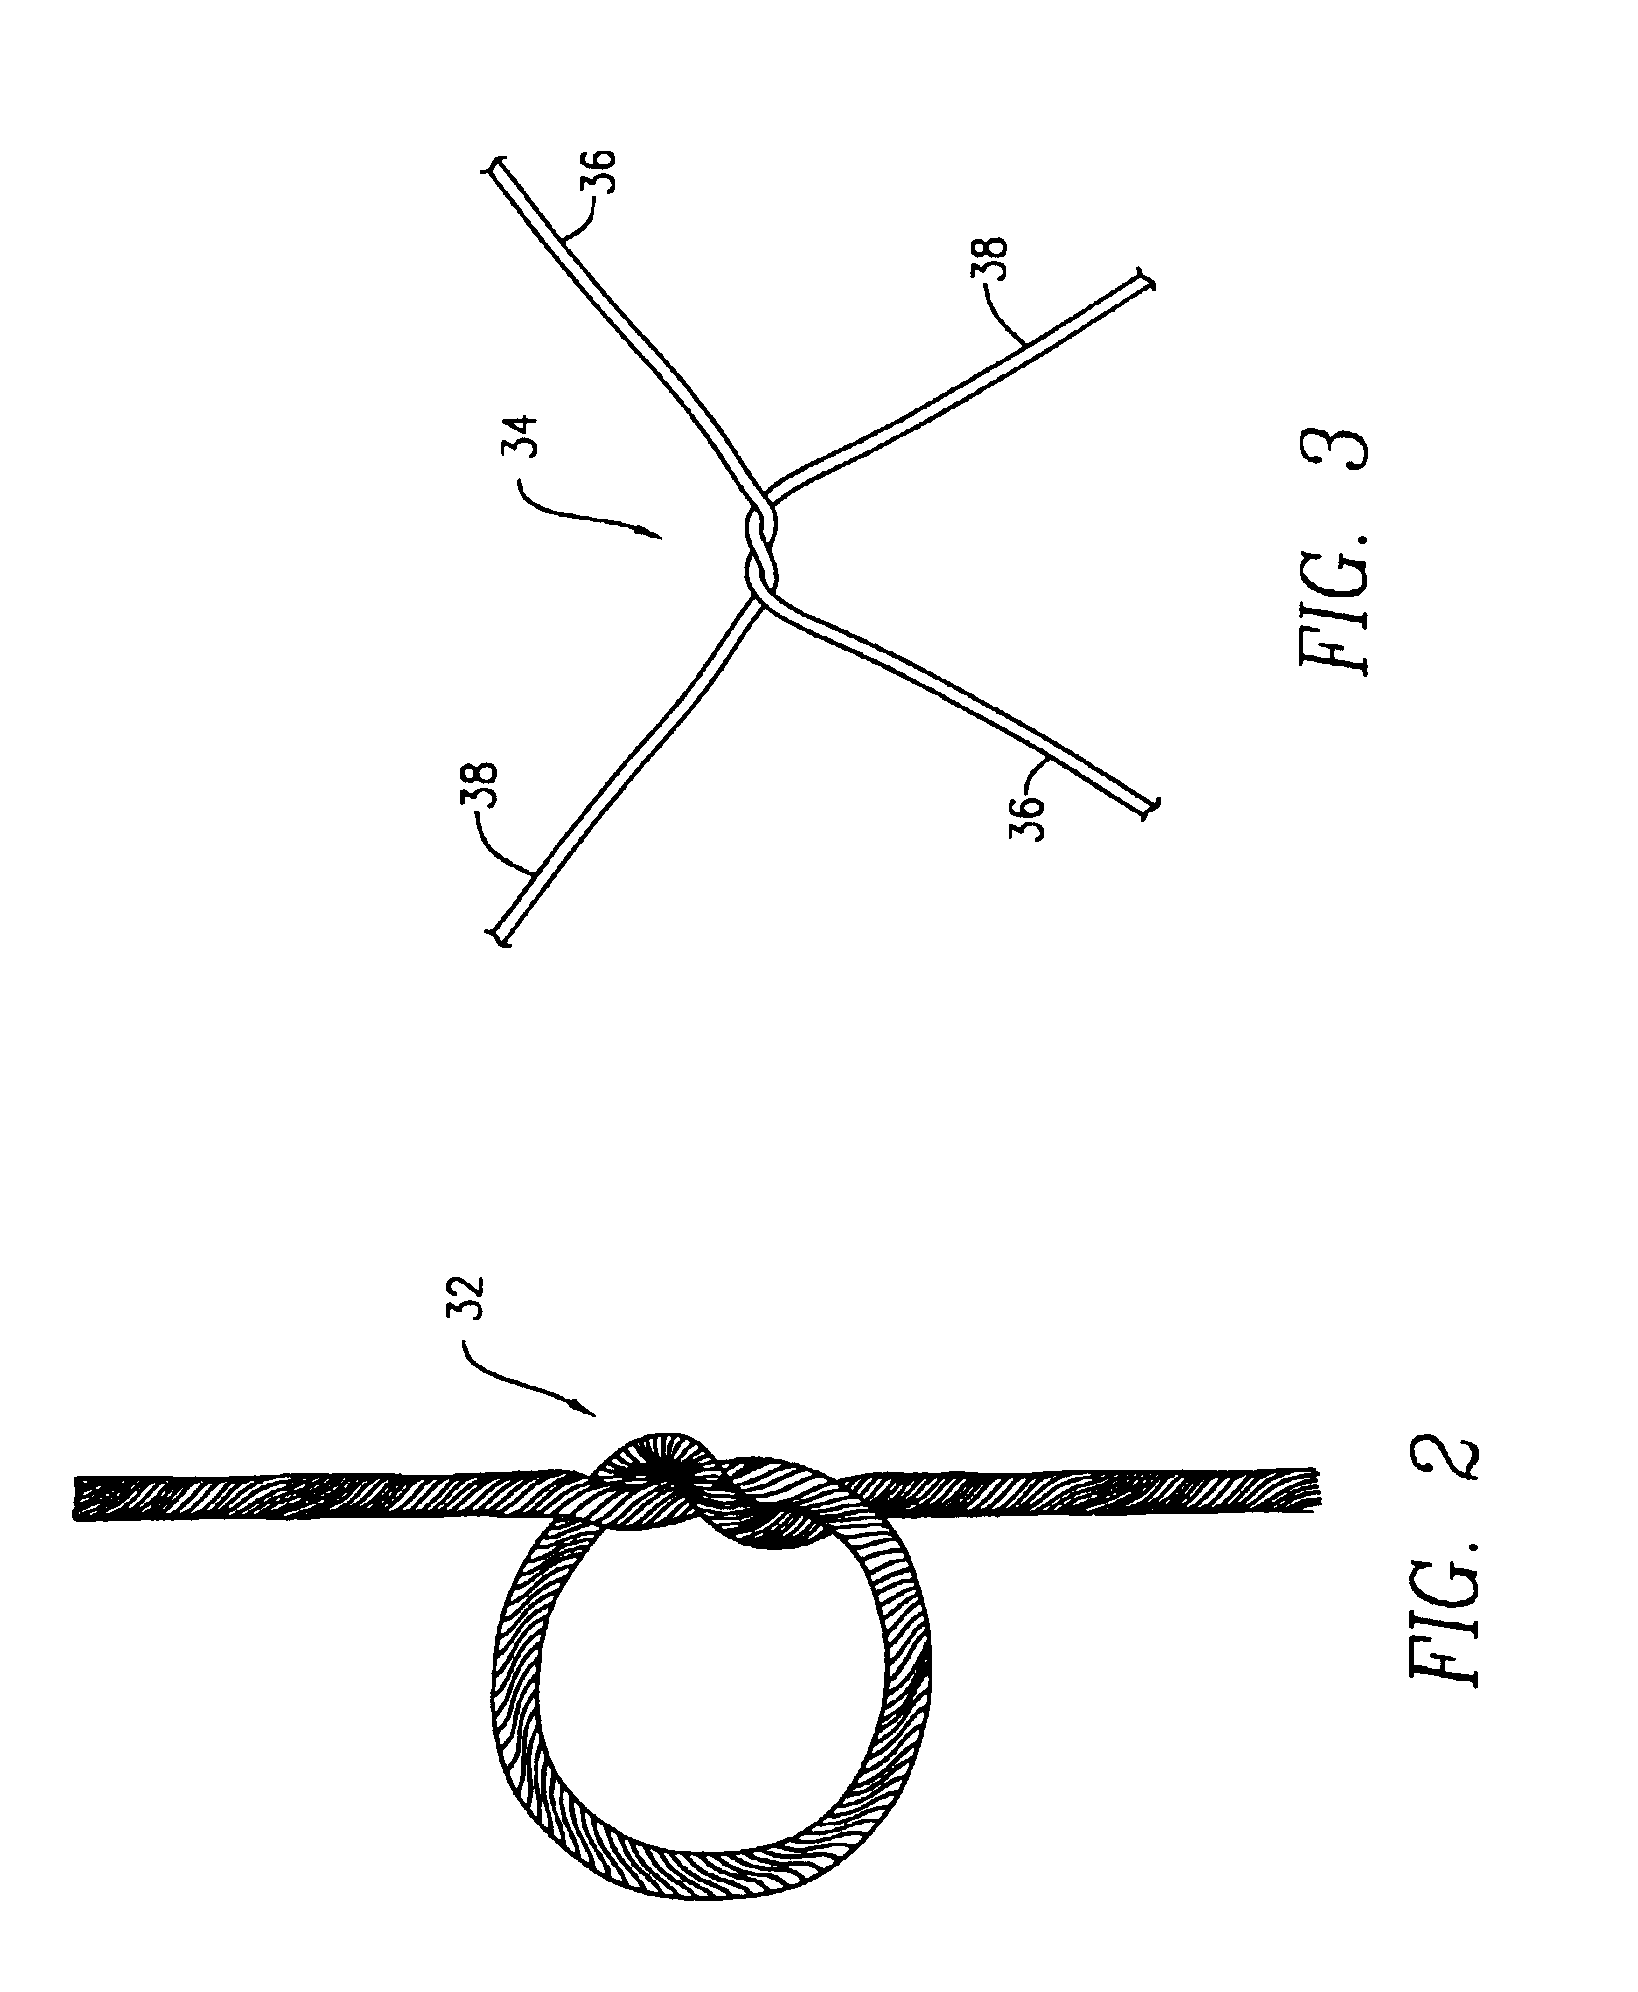 Process for making sutures having improved knot tensile strength